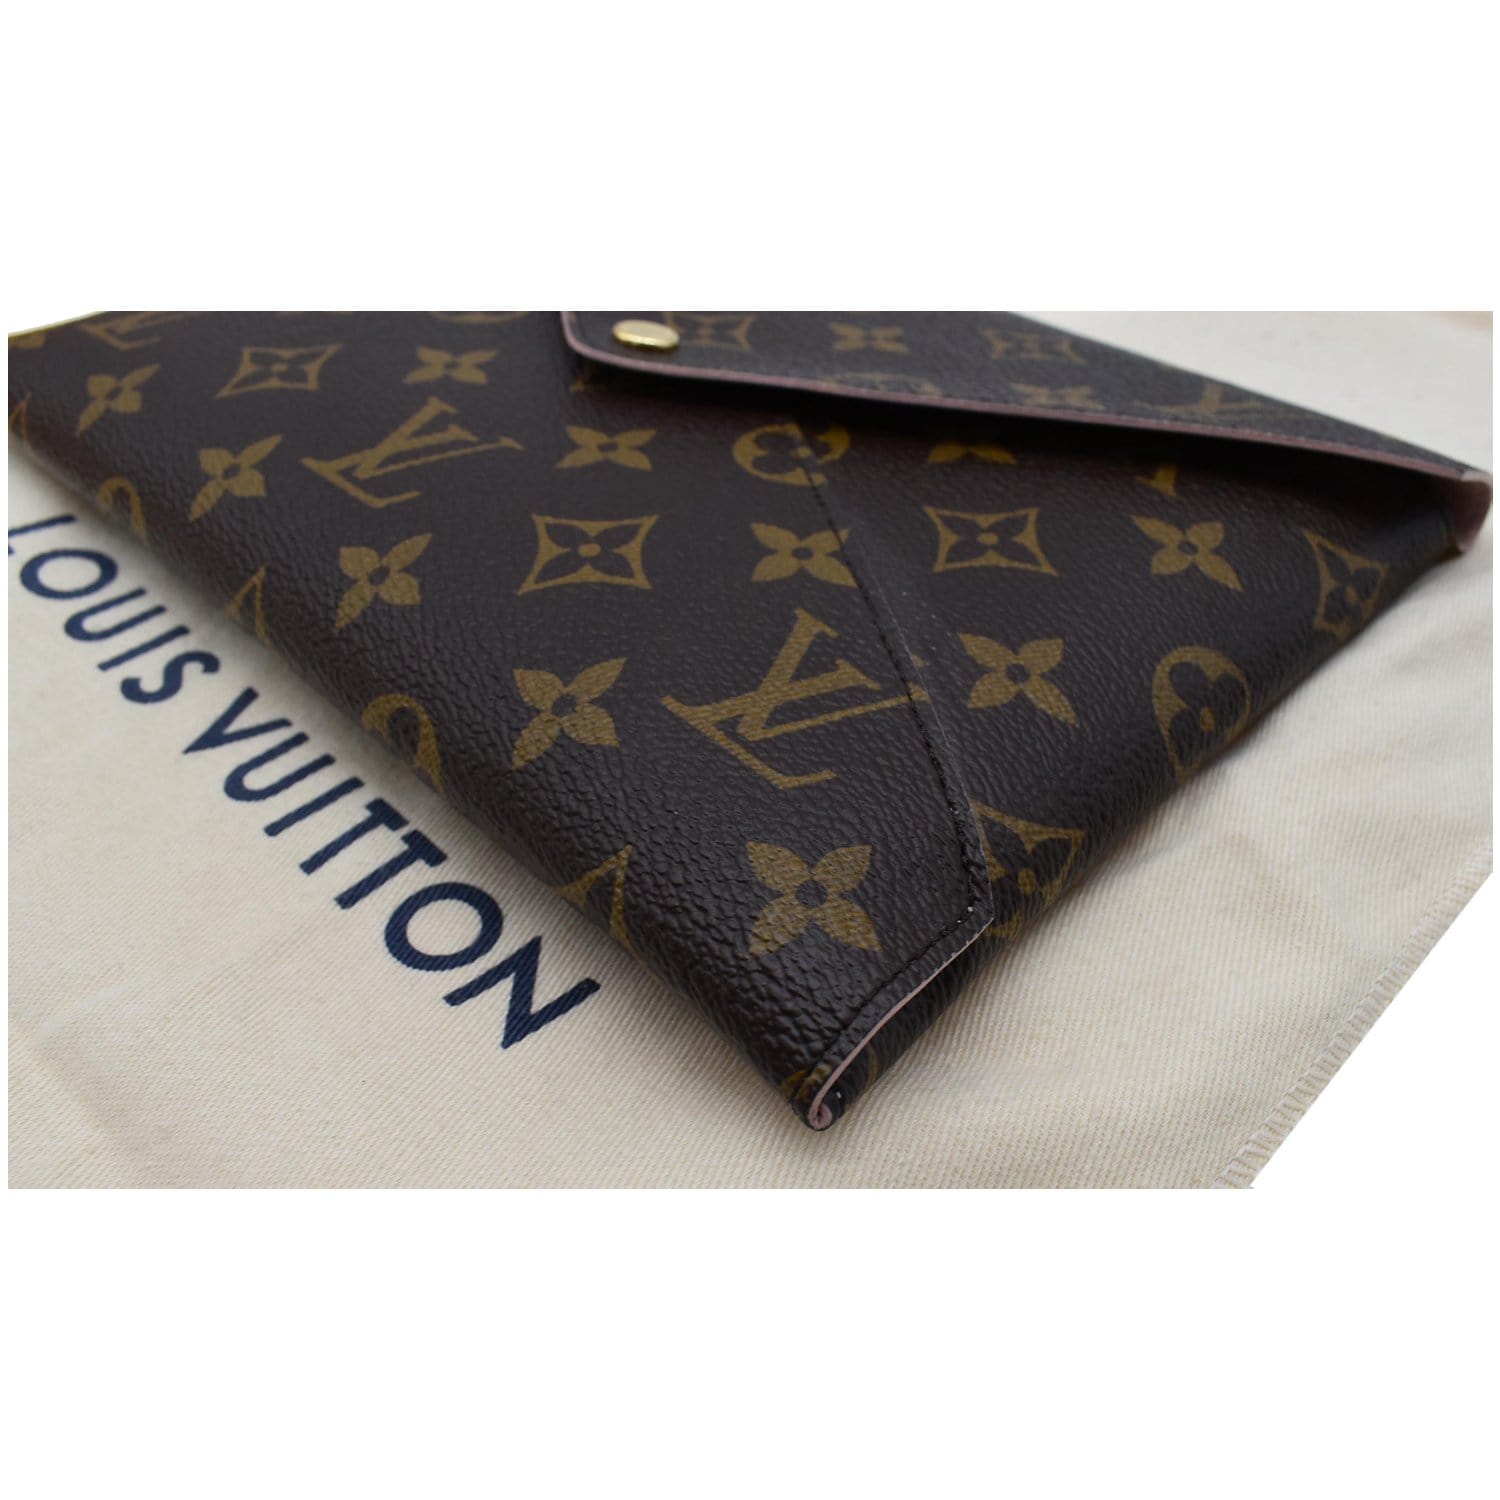 Louis Vuitton - Authenticated Kirigami Clutch Bag - Leather Brown for Women, Very Good Condition